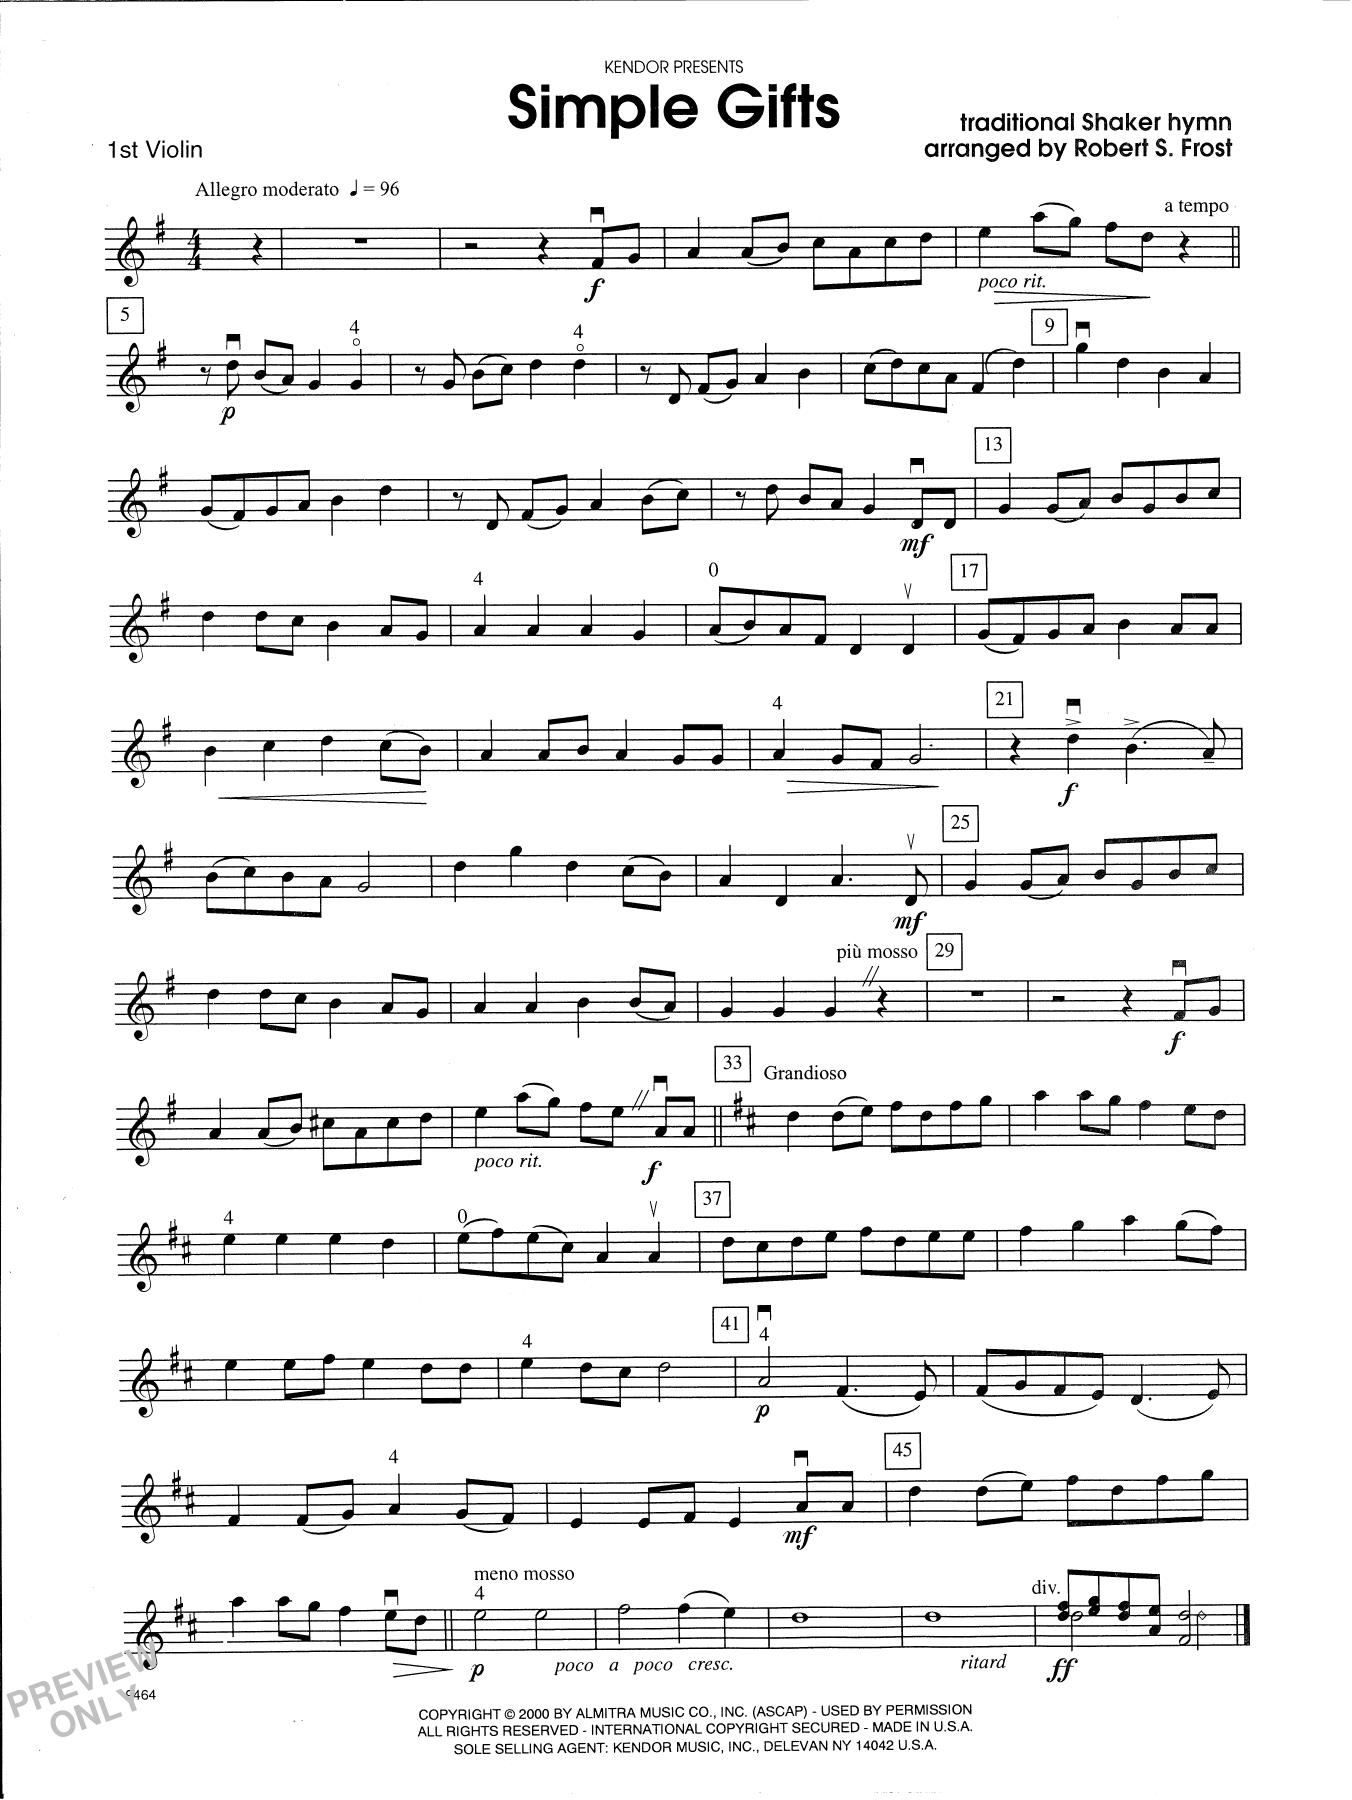 Download Robert S. Frost Simple Gifts - 1st Violin Sheet Music